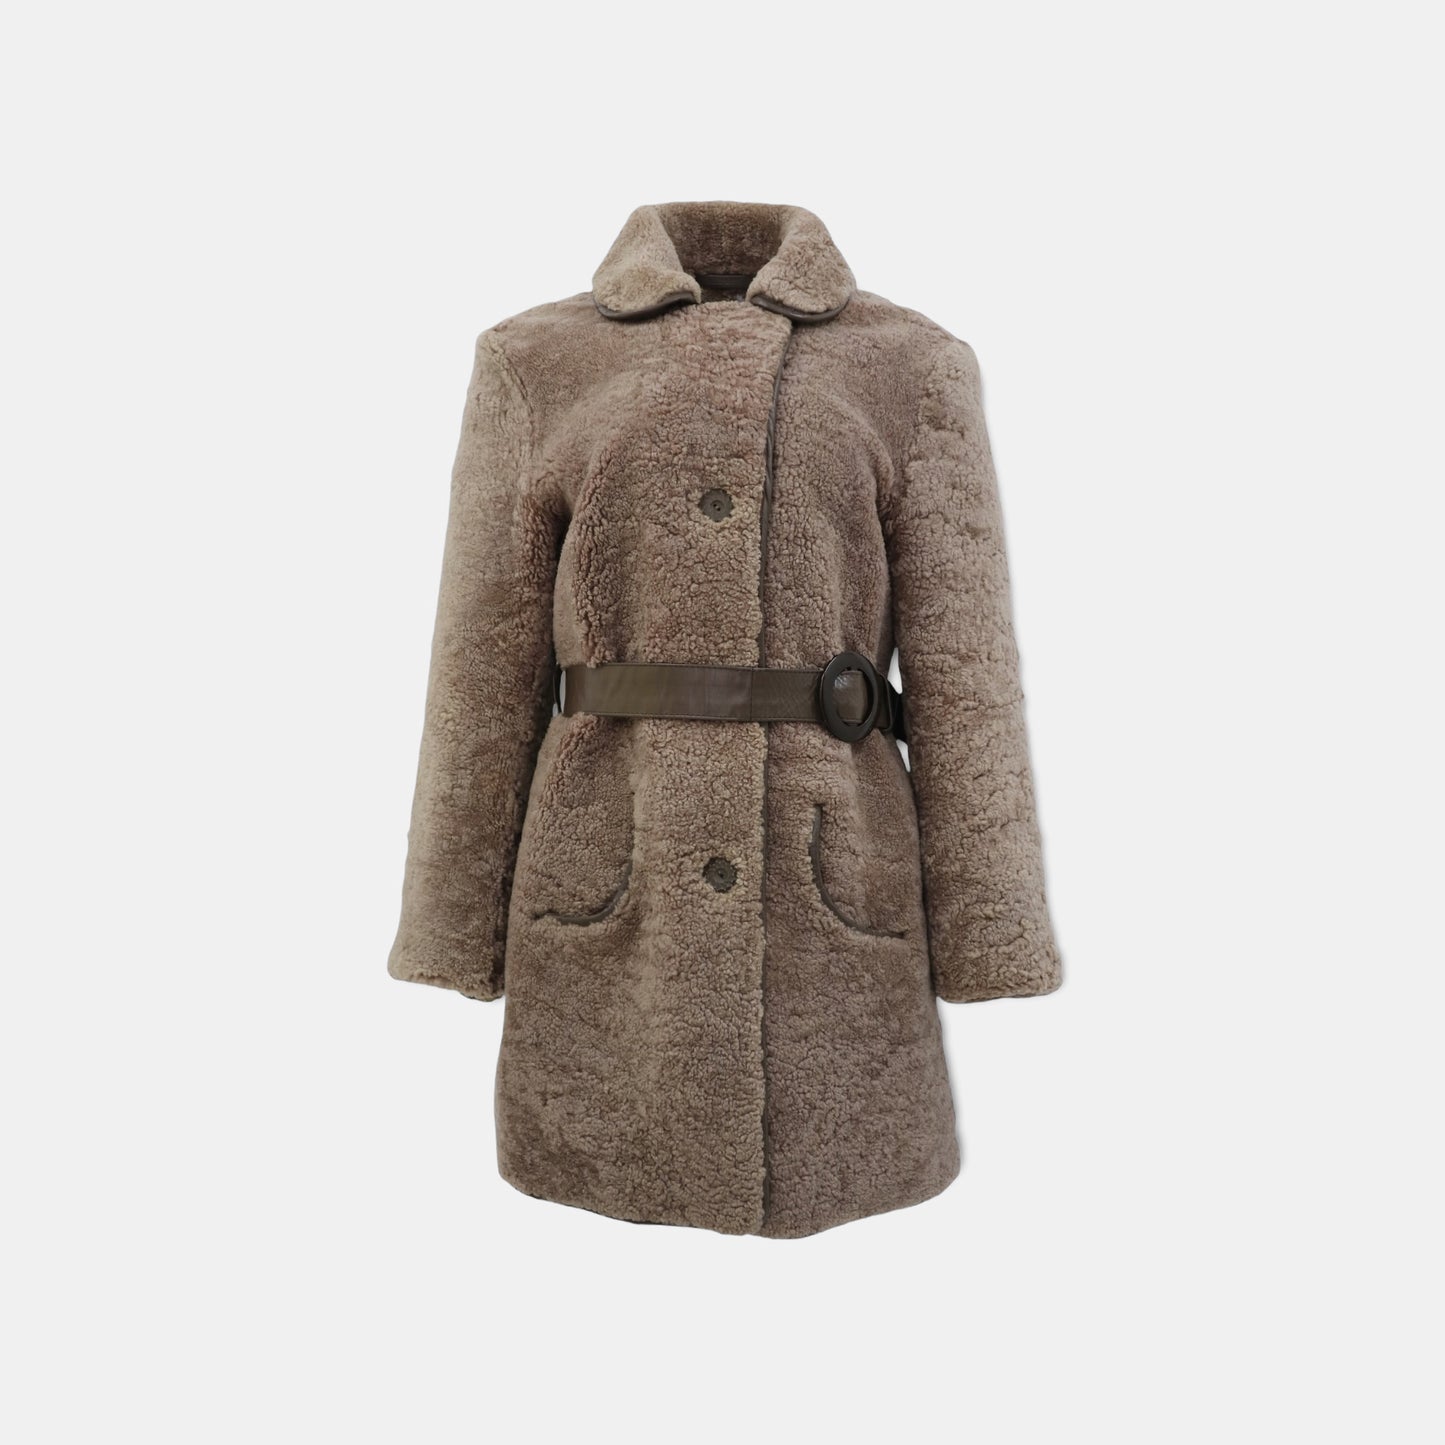 Pre-Owned Owen Barry Shearling